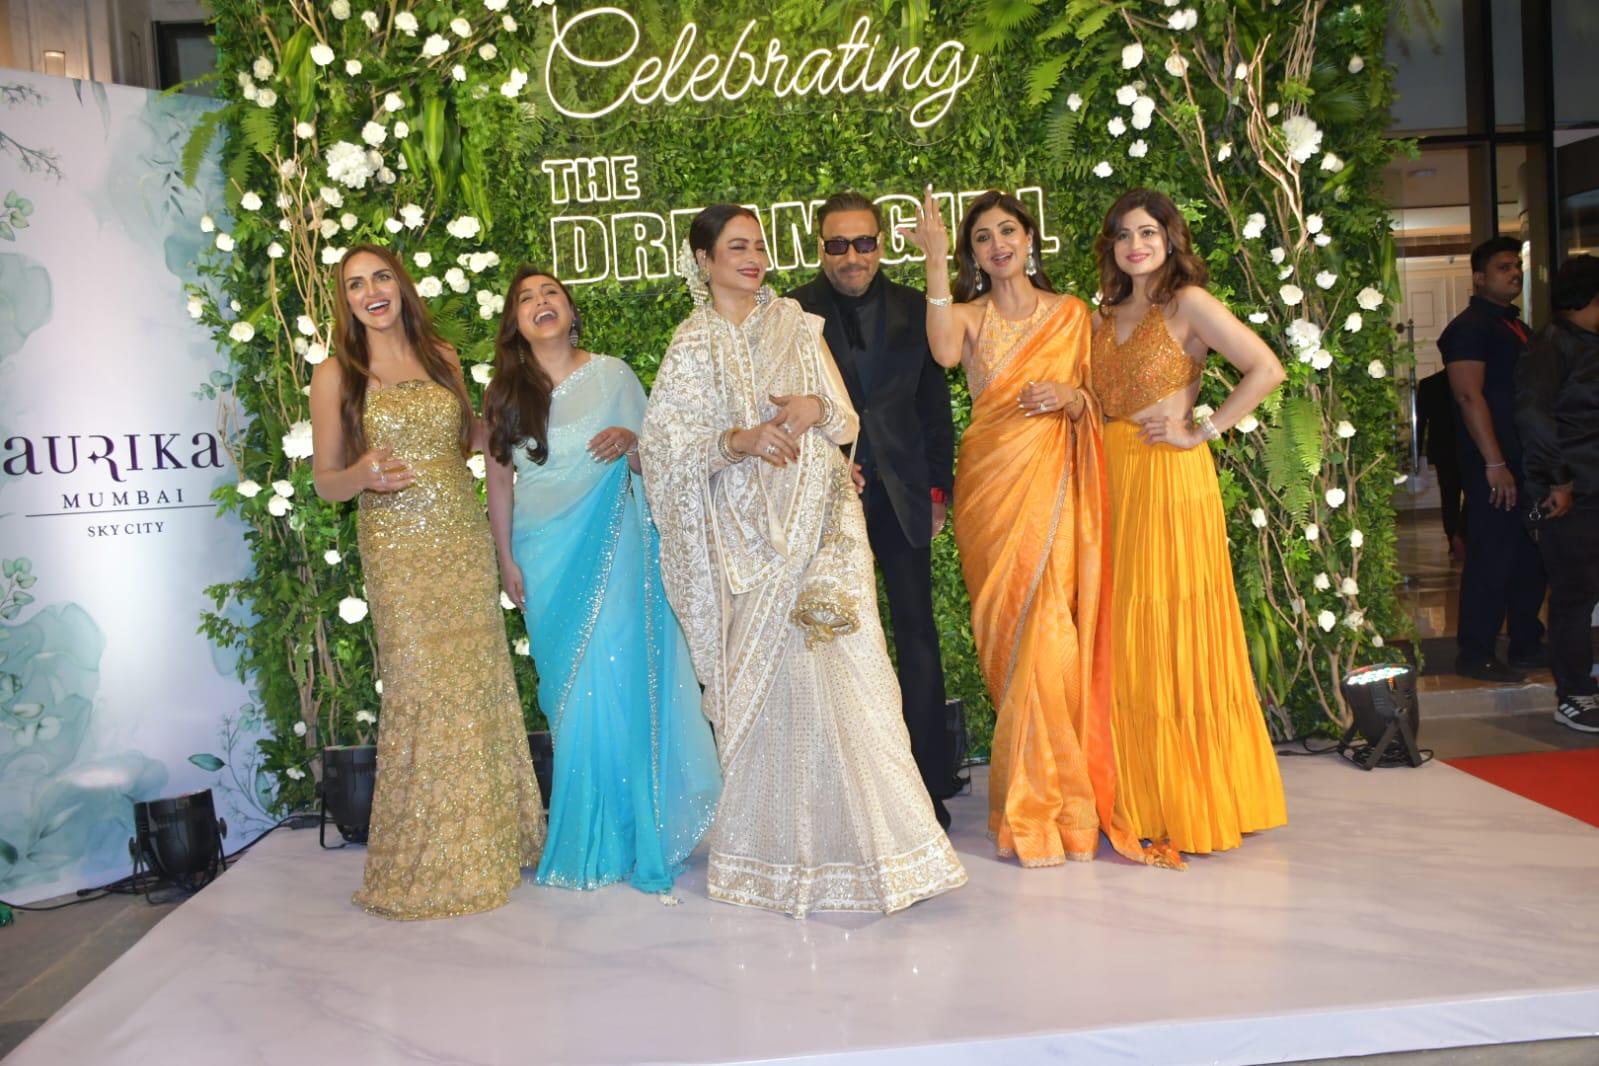 A moment for the ages, all the gorgeous ladies were pictured laughing over something hilarious, we bet!